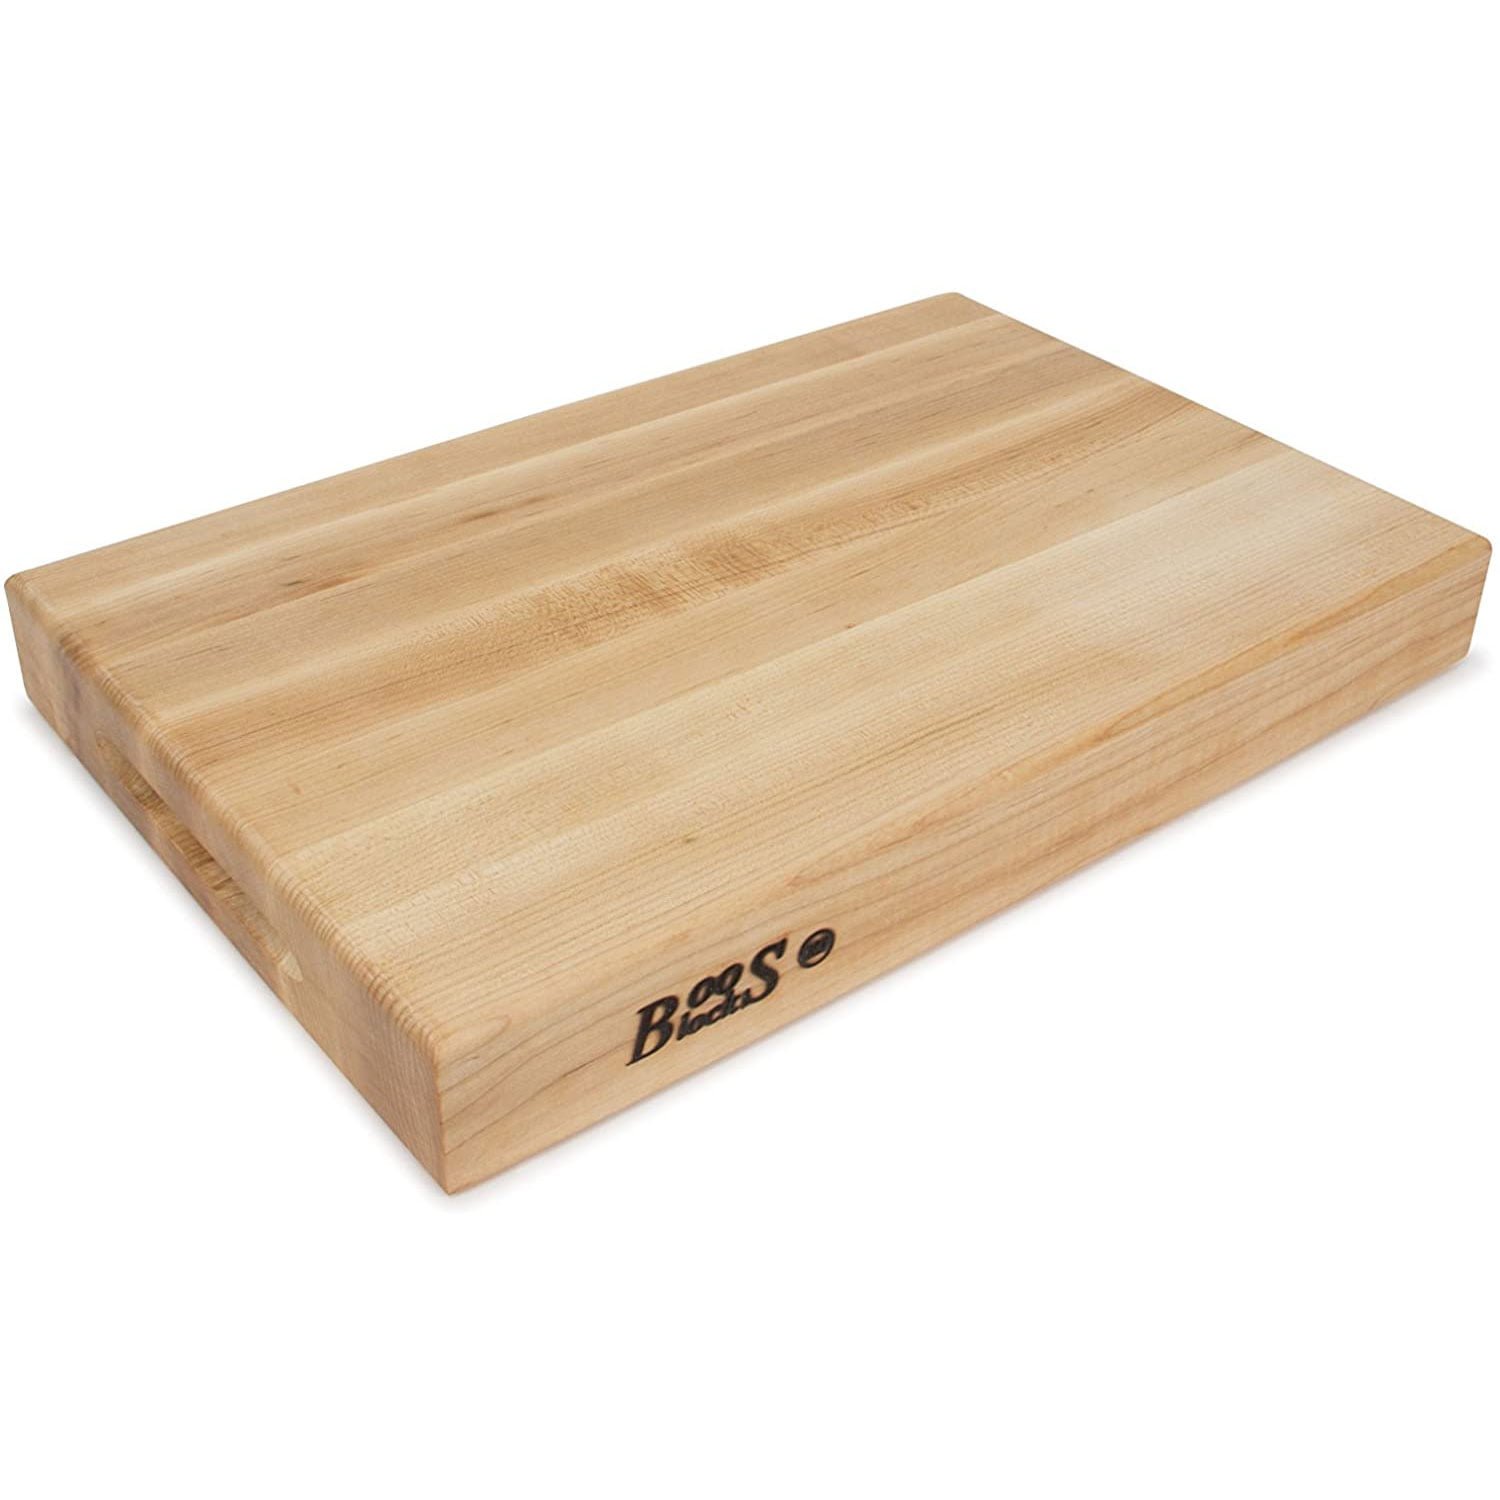 PICK YOUR SIZE Wood Commercial Restaurant Solid Cutting Board Butcher Block New 